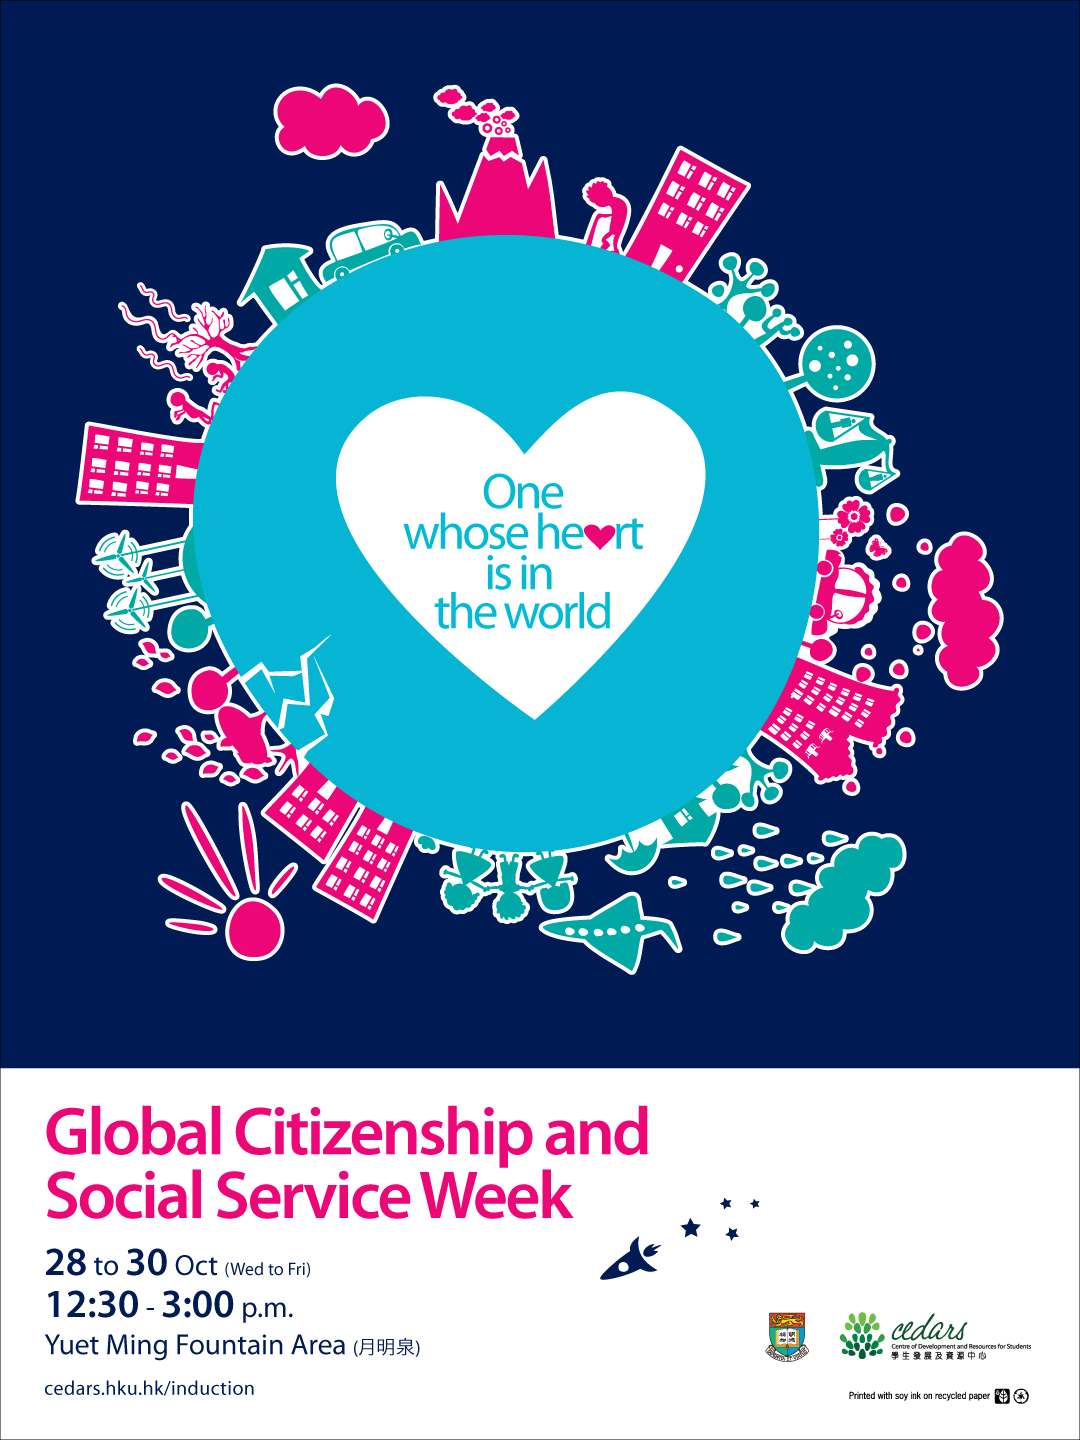 Global Citizenship and Social Service Week